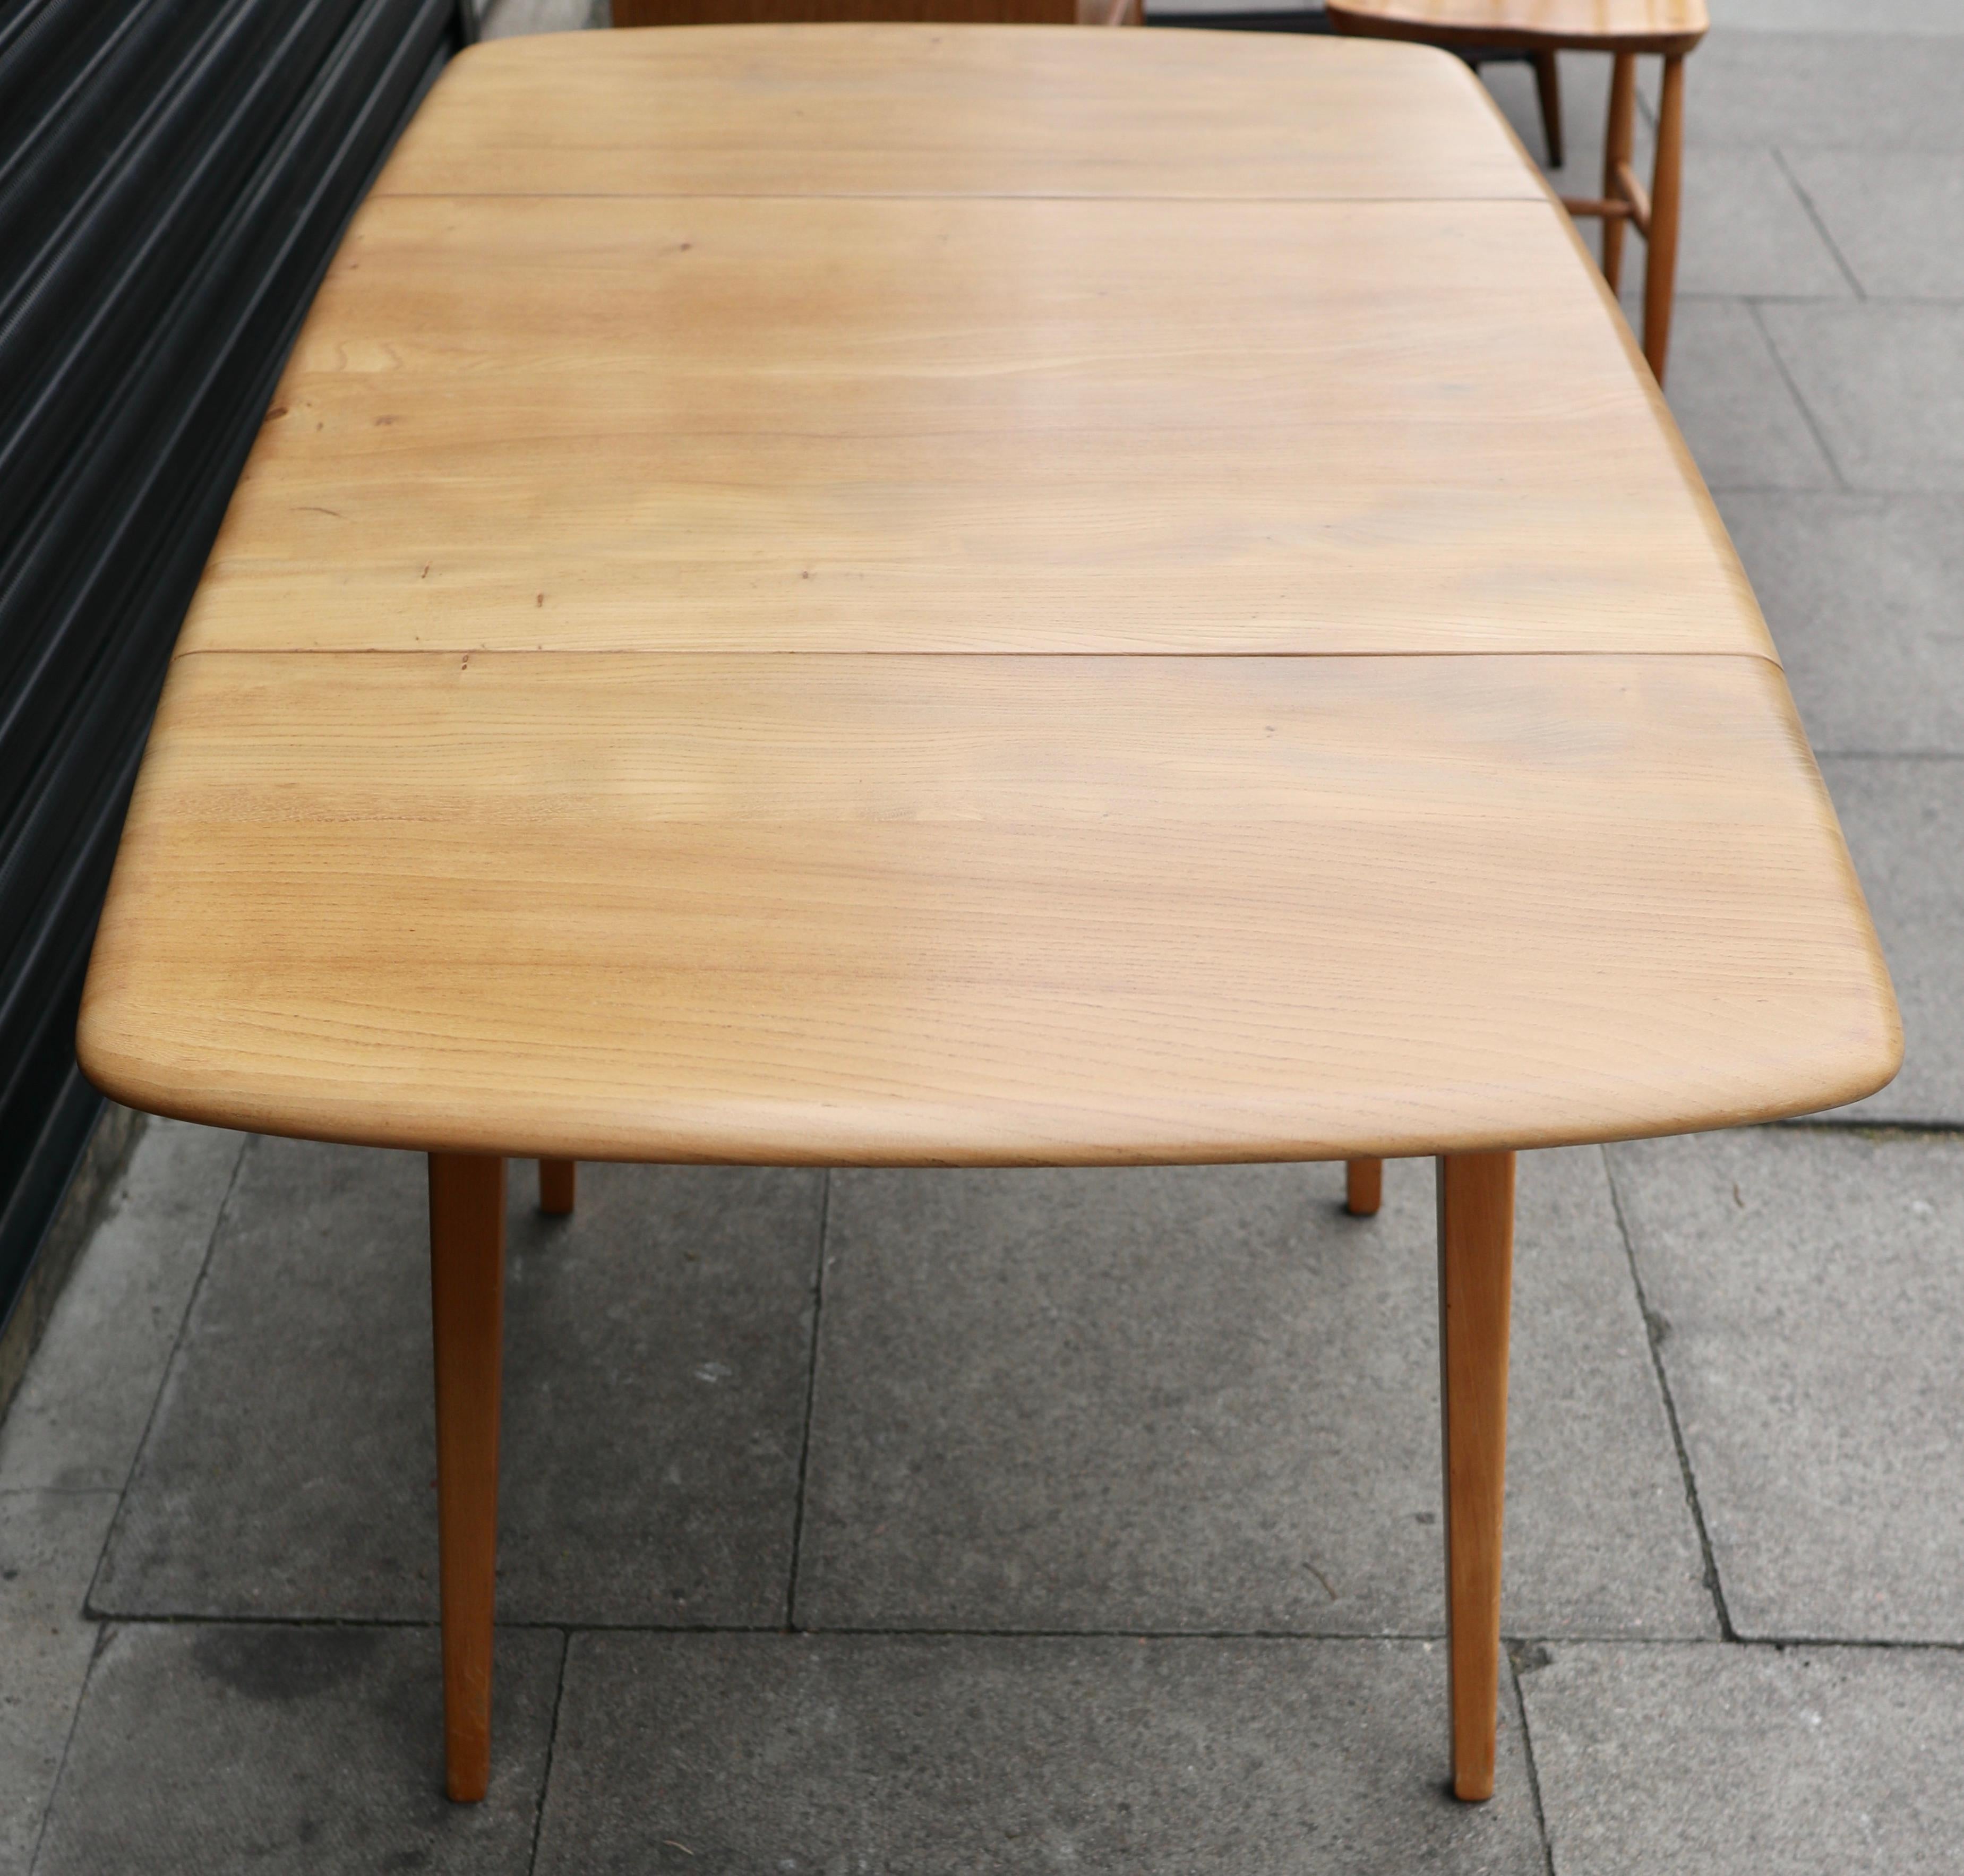 A vintage 1960s drop leaf ercol rectangular dining table.  This table has a solid Elmwood top and a four legged solid Beech base. It has two drop leaves and is very good vintage condition, having been completely refurbished and refinished.